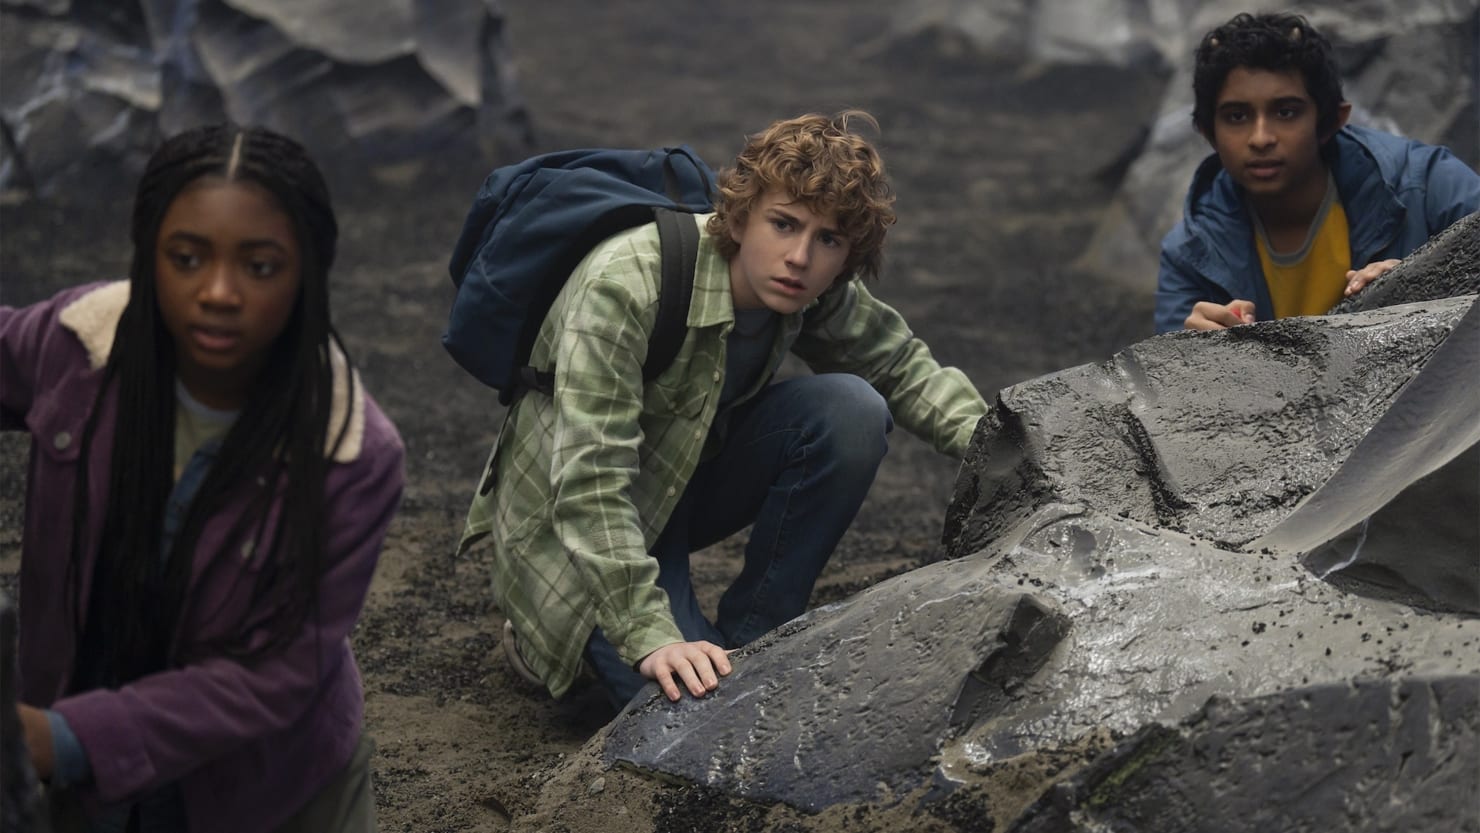 ‘Percy Jackson and the Olympians’ Episode 7 Recap: Into the Underworld